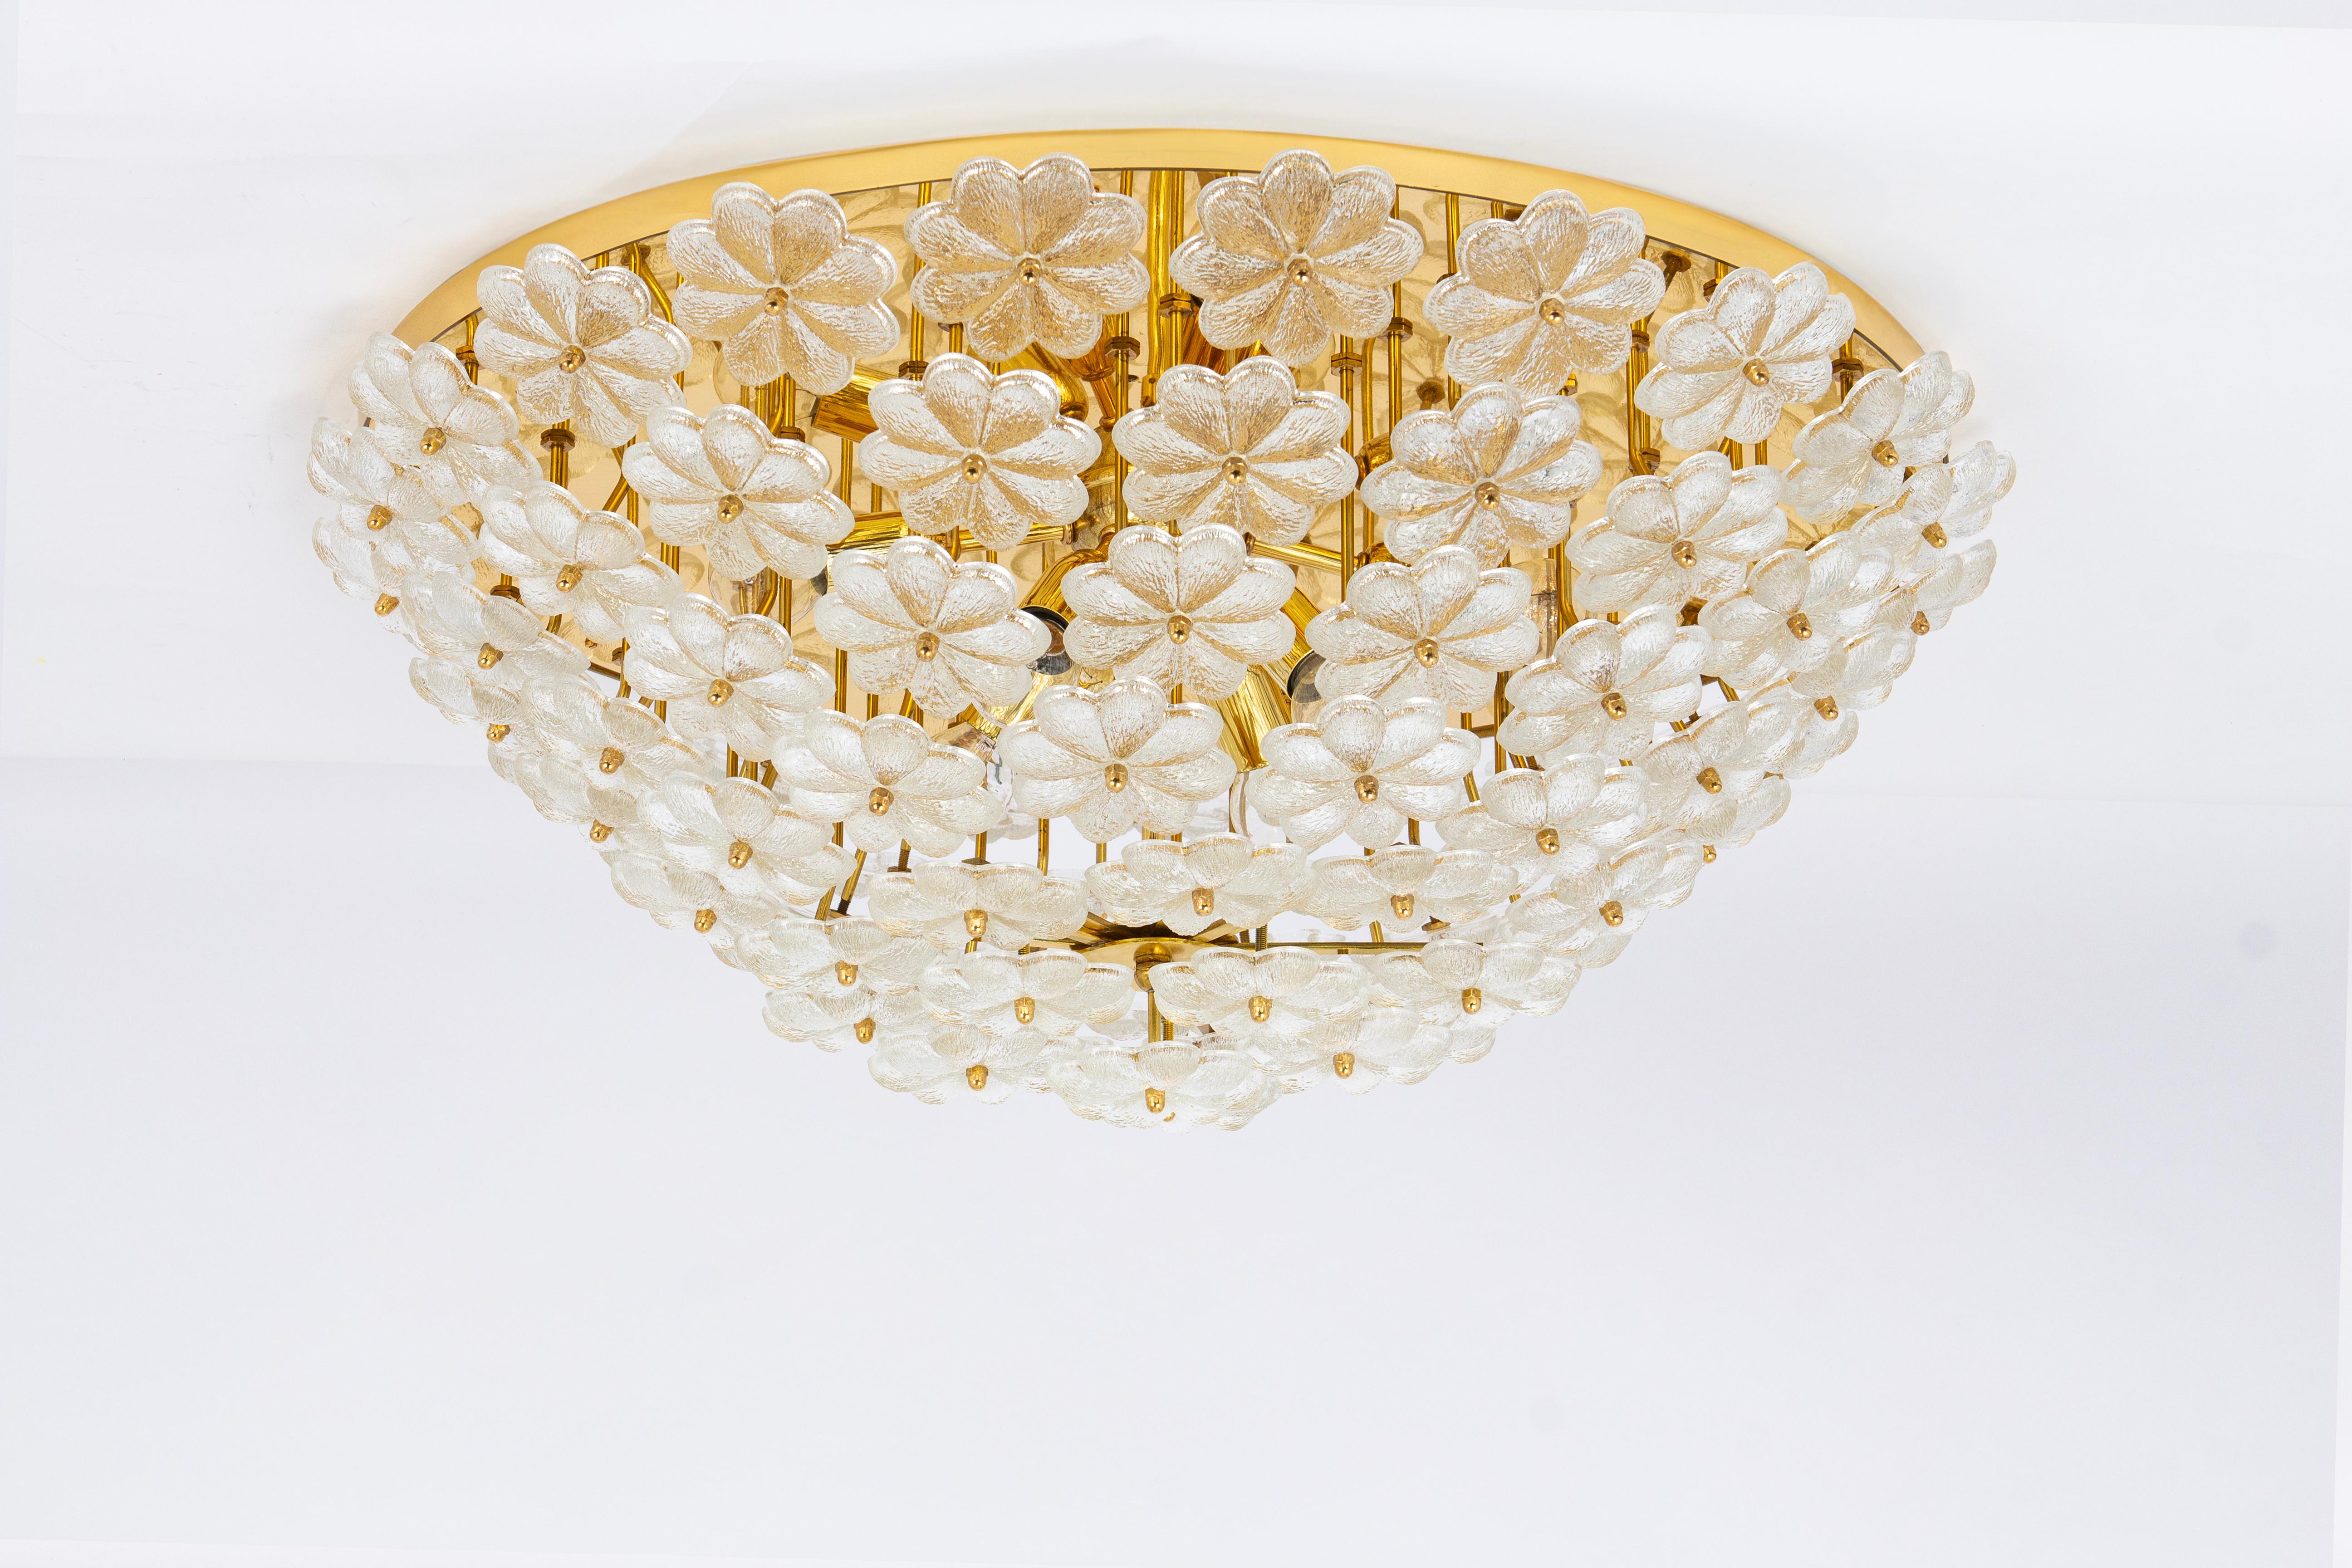 A Huge Midcentury flush mount light with many Murano glass flowers over a polished brass base, made by Ernst Palme in Germany in 1970s.
Very rare.
High quality and in very good condition. Cleaned, well-wired and ready to use. 

The fixture requires